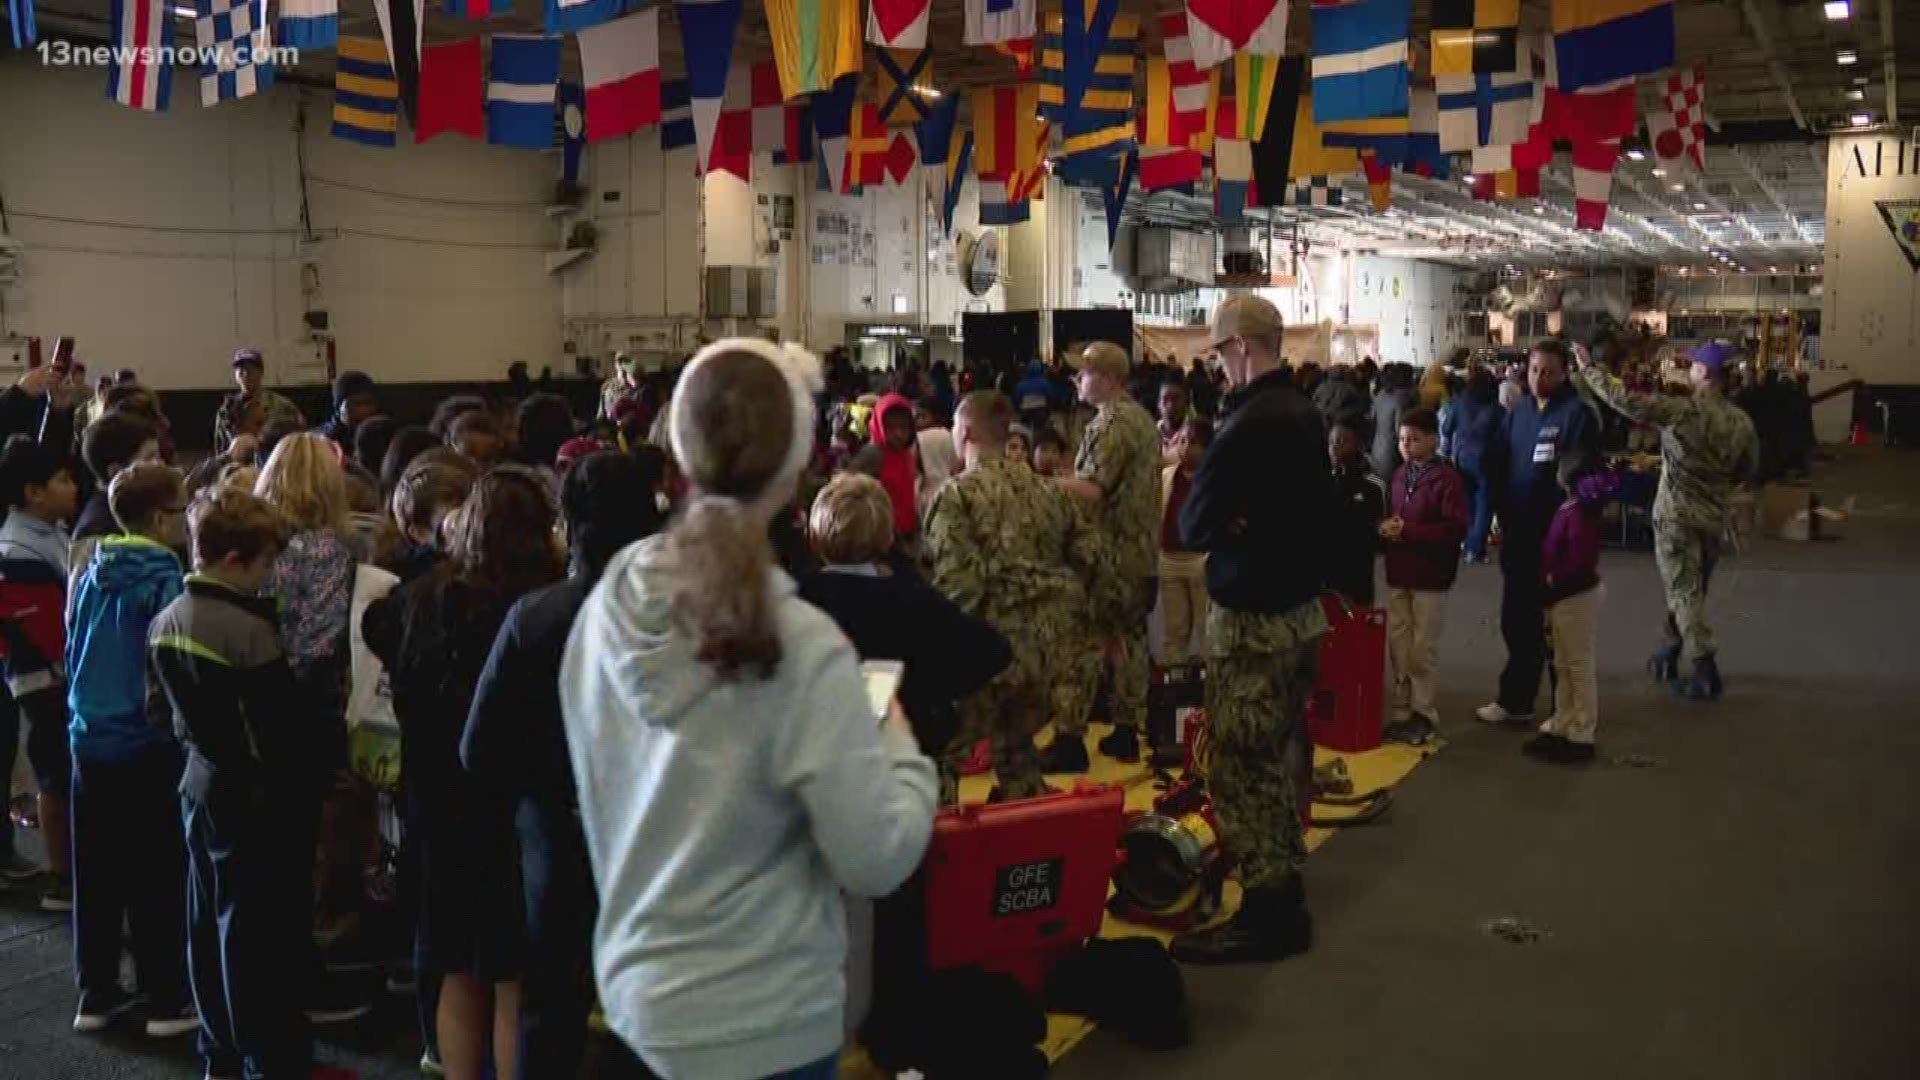 Instead of going to class, 2,500 Norfolk students boarded the USS John C. Stennis for STEM lessons. This was the third STEM Day at Naval Station Norfolk since  2016.